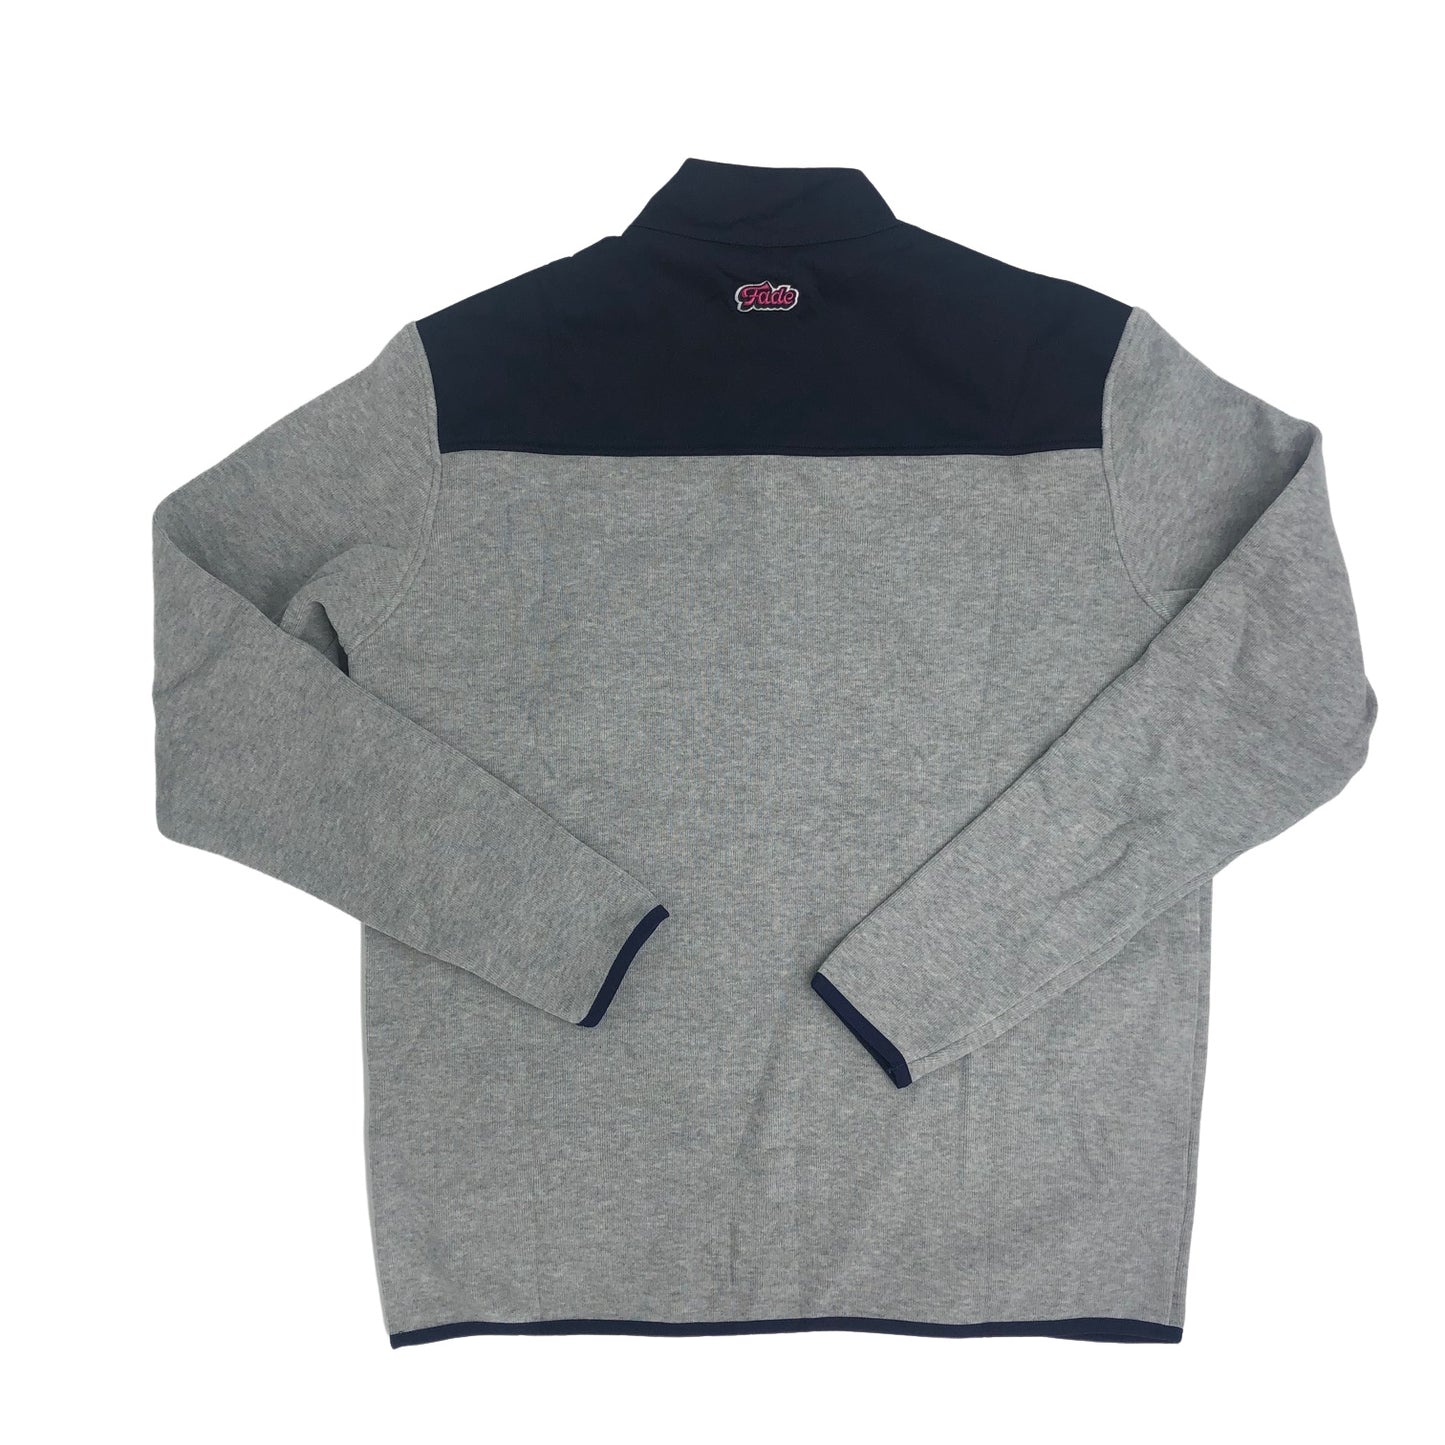 FADE-TWO DOWN HYBRID 1/4 ZIP   GRY HEATHER/MIDNIGHT